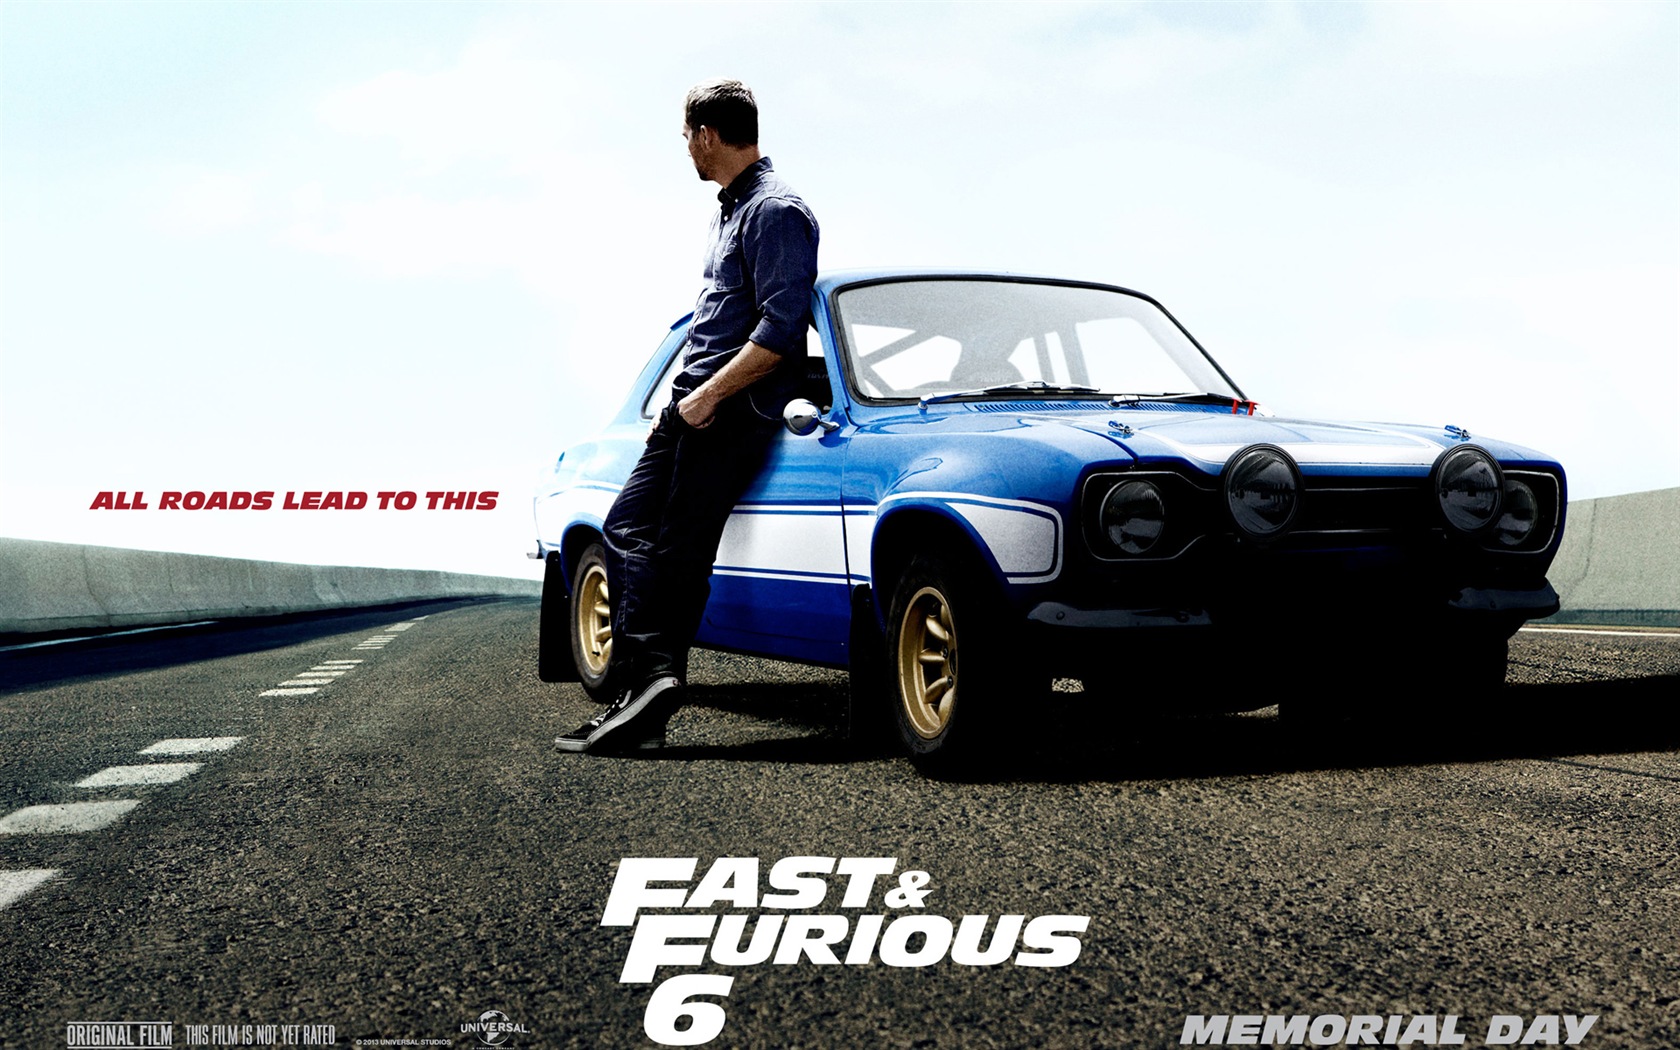 Fast And Furious 6 HD movie wallpapers #10 - 1680x1050